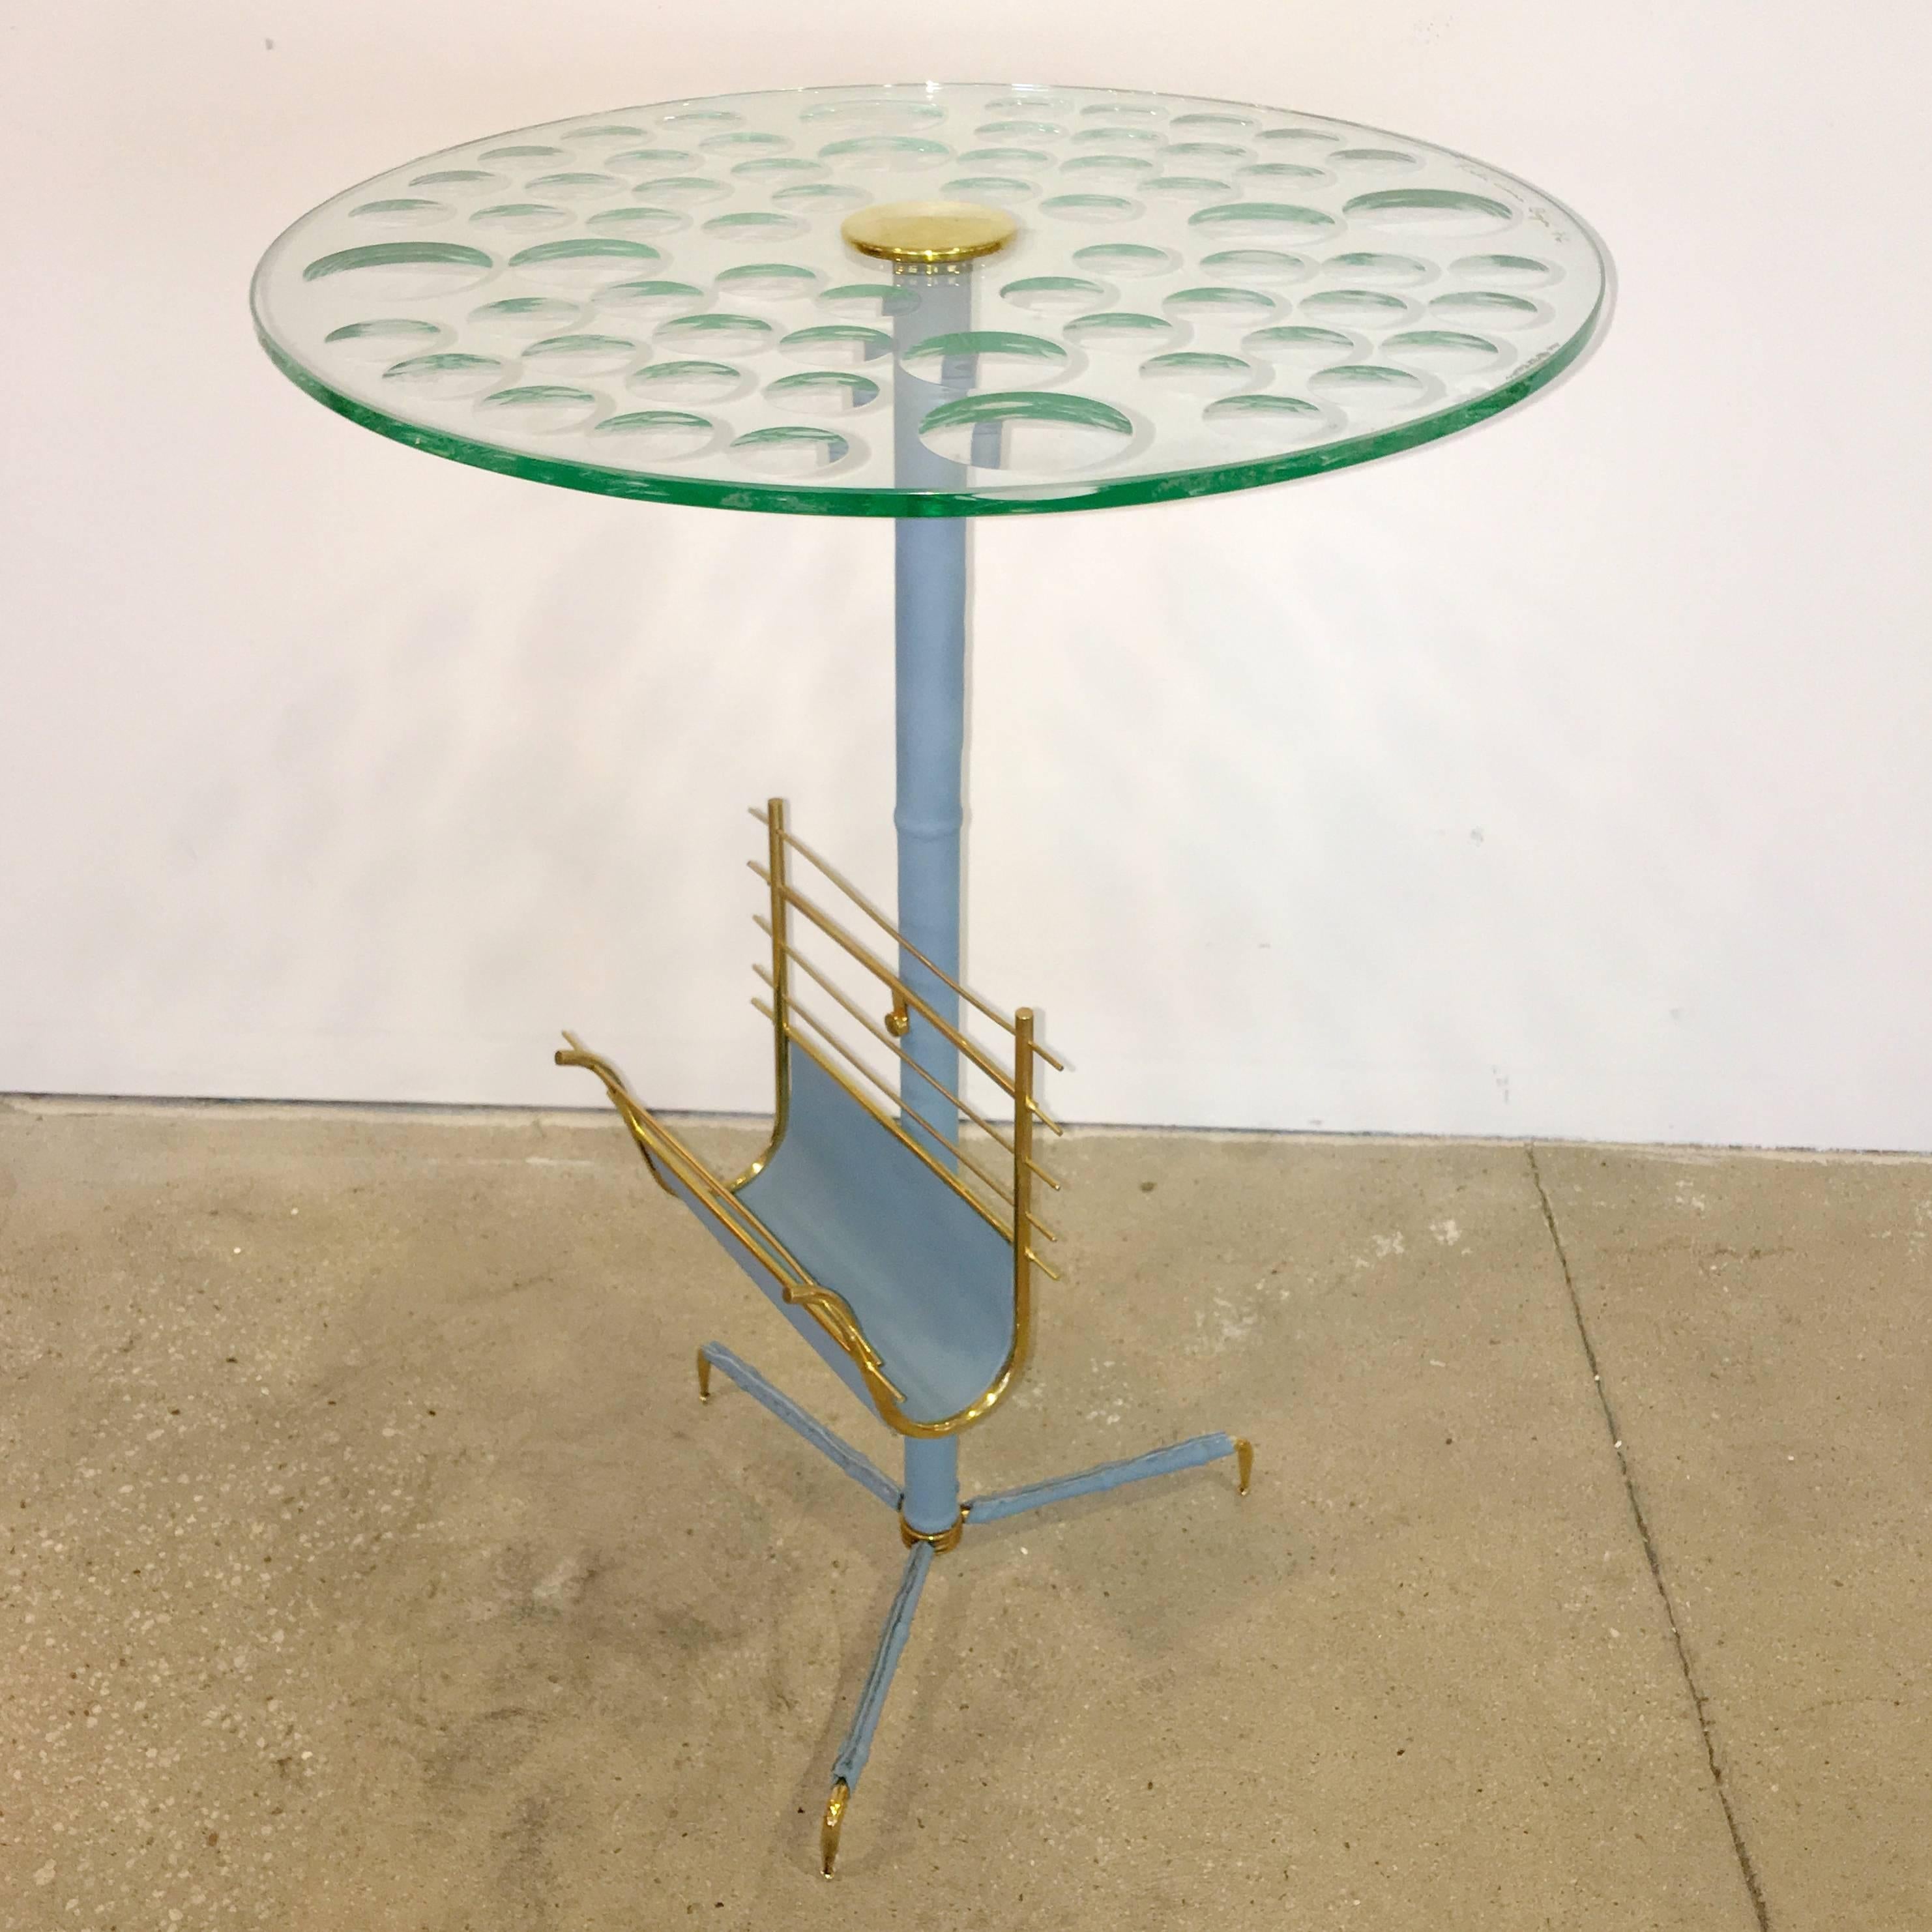 Magiscope Optic Glass Magazine Table In Excellent Condition For Sale In Hanover, MA